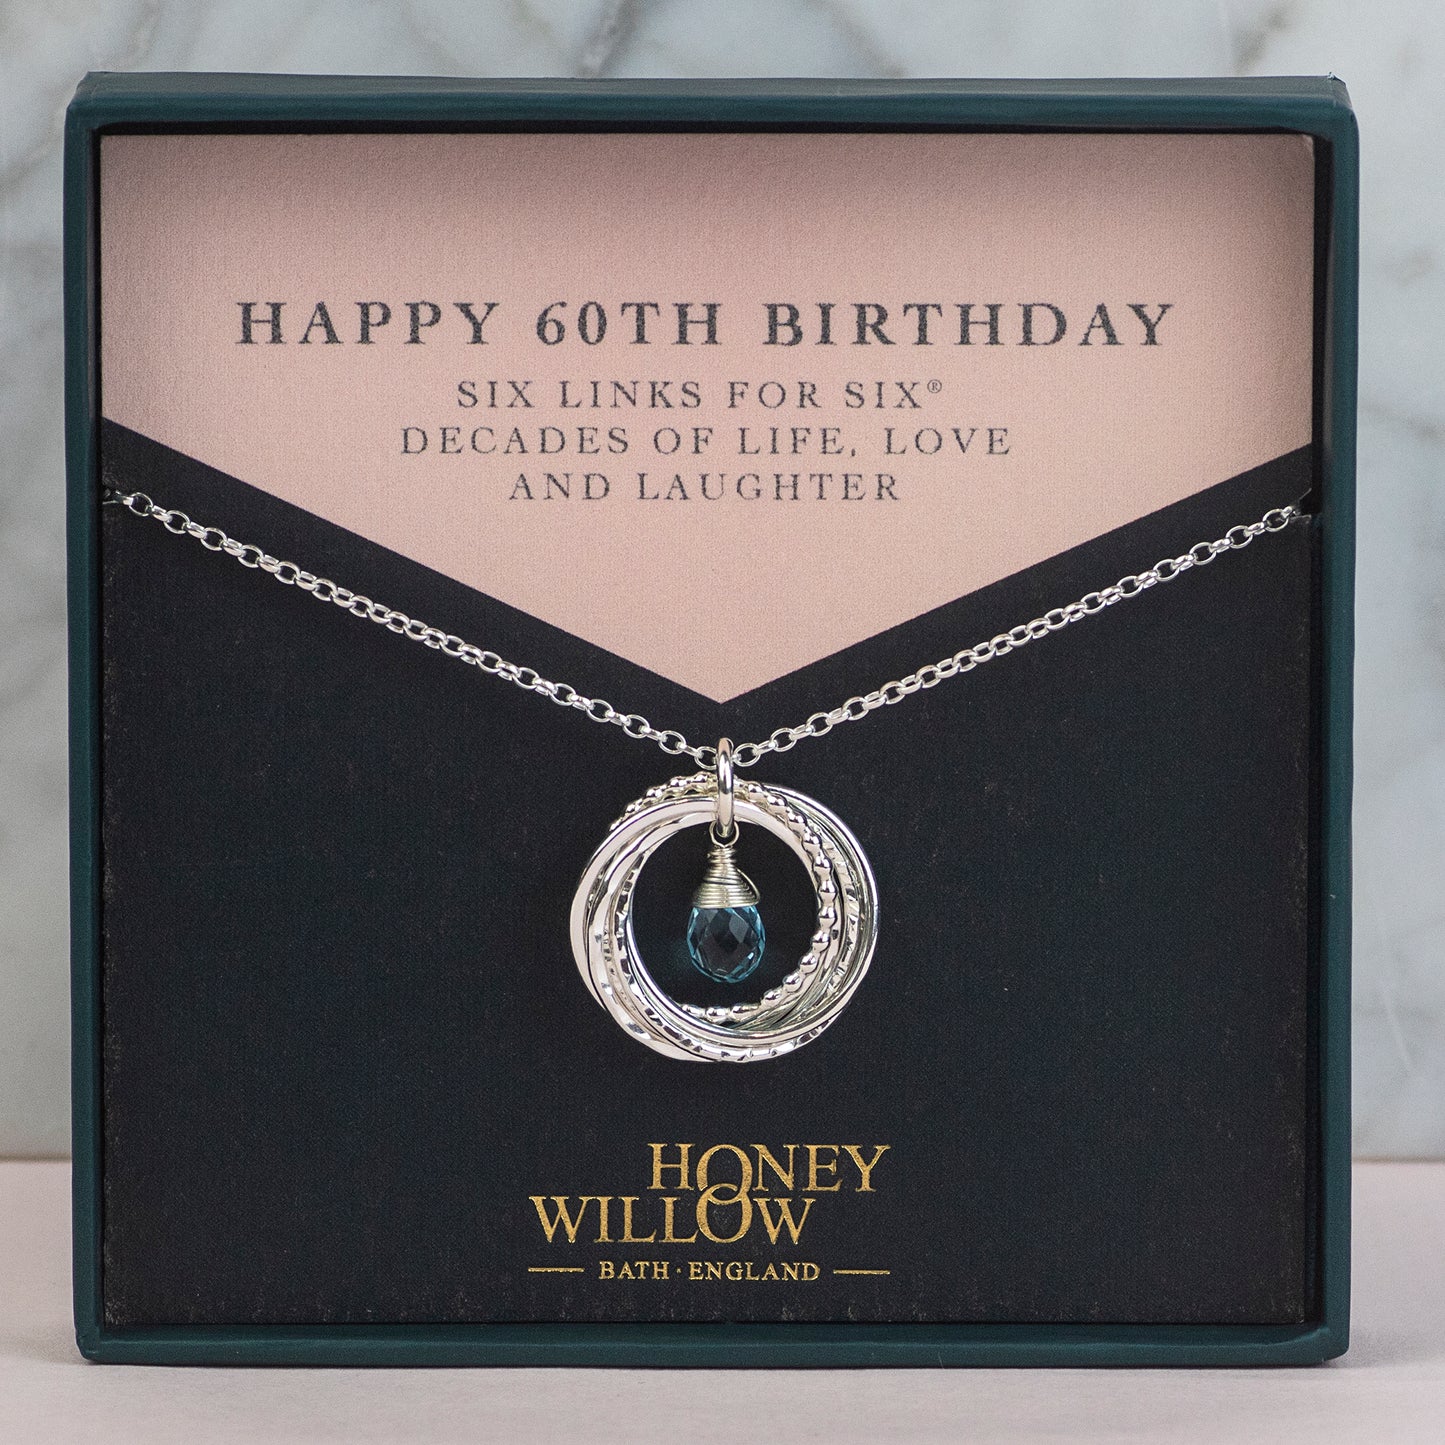 60th Birthday Birthstone Necklace - Silver - The Original 6 Links for 6 Decades Necklace